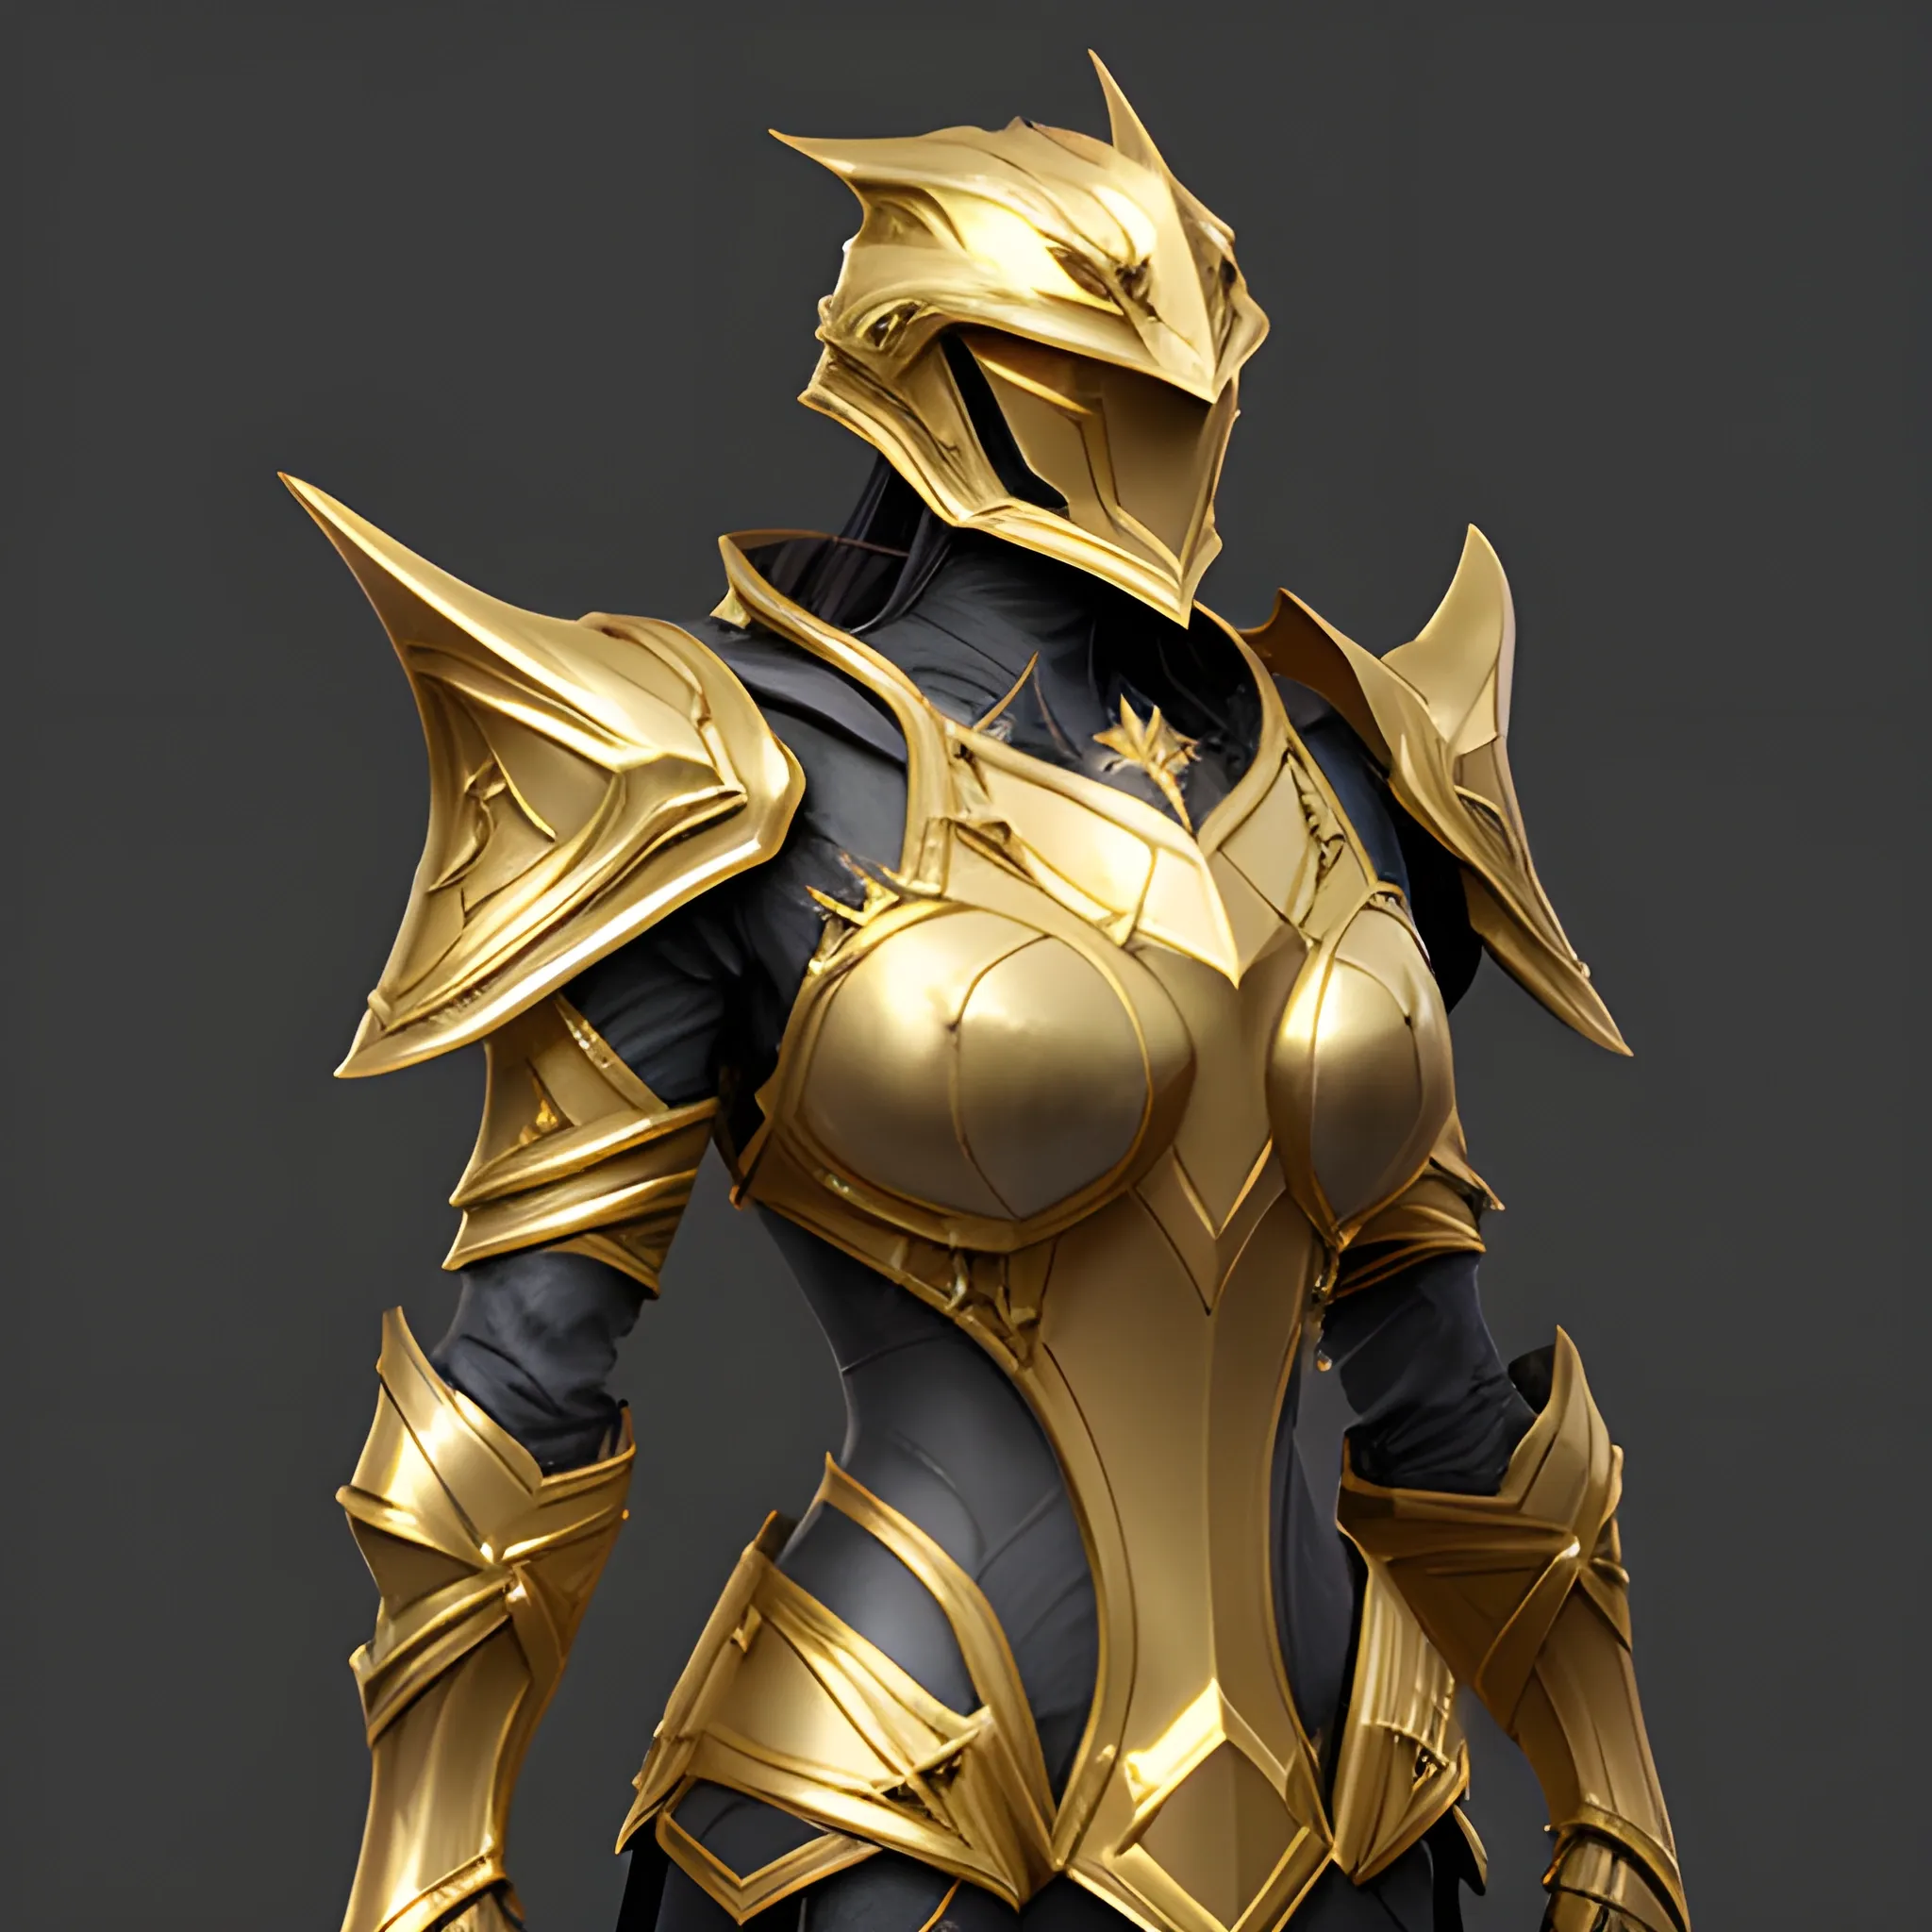 ligth armor, fantasy, elegant, concept art, ray tracing, high details, golden accents